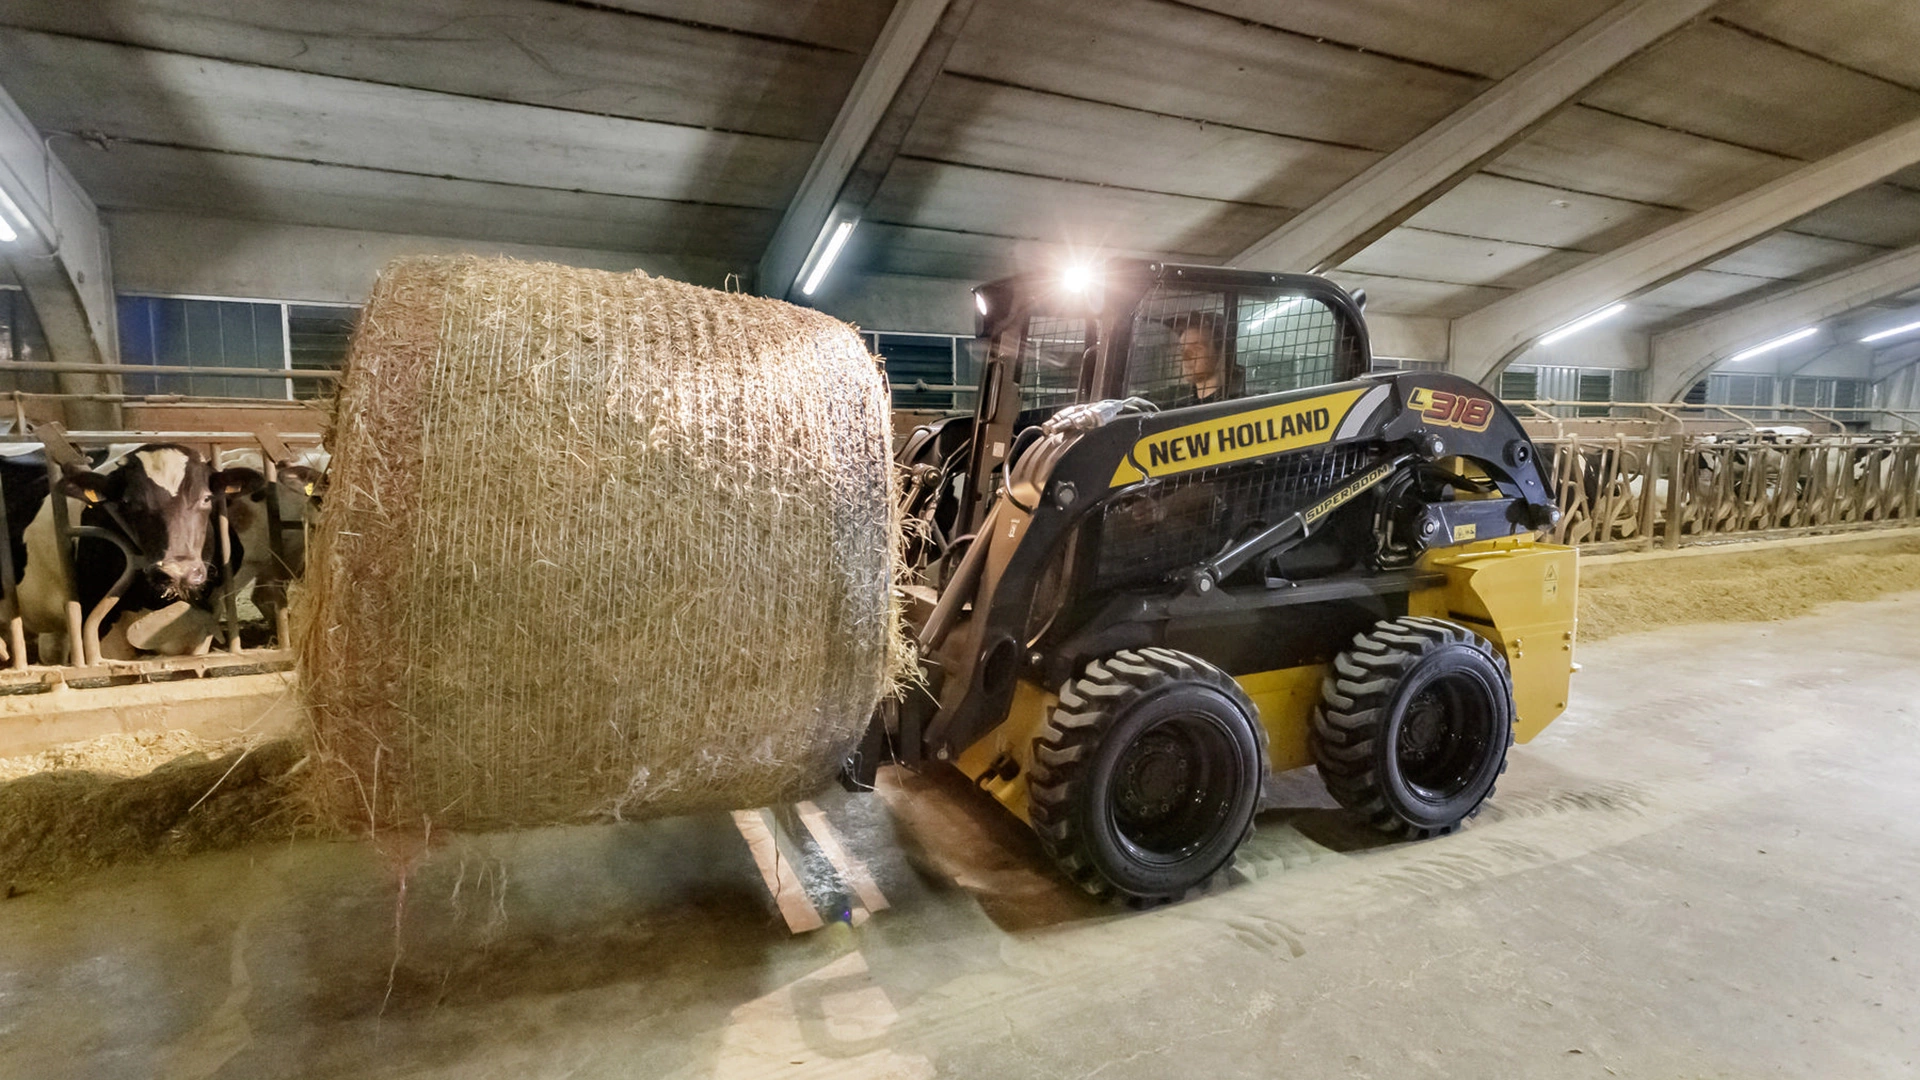 New Holland Skid Steer Loader moving hay bale in dairy barn with cows.